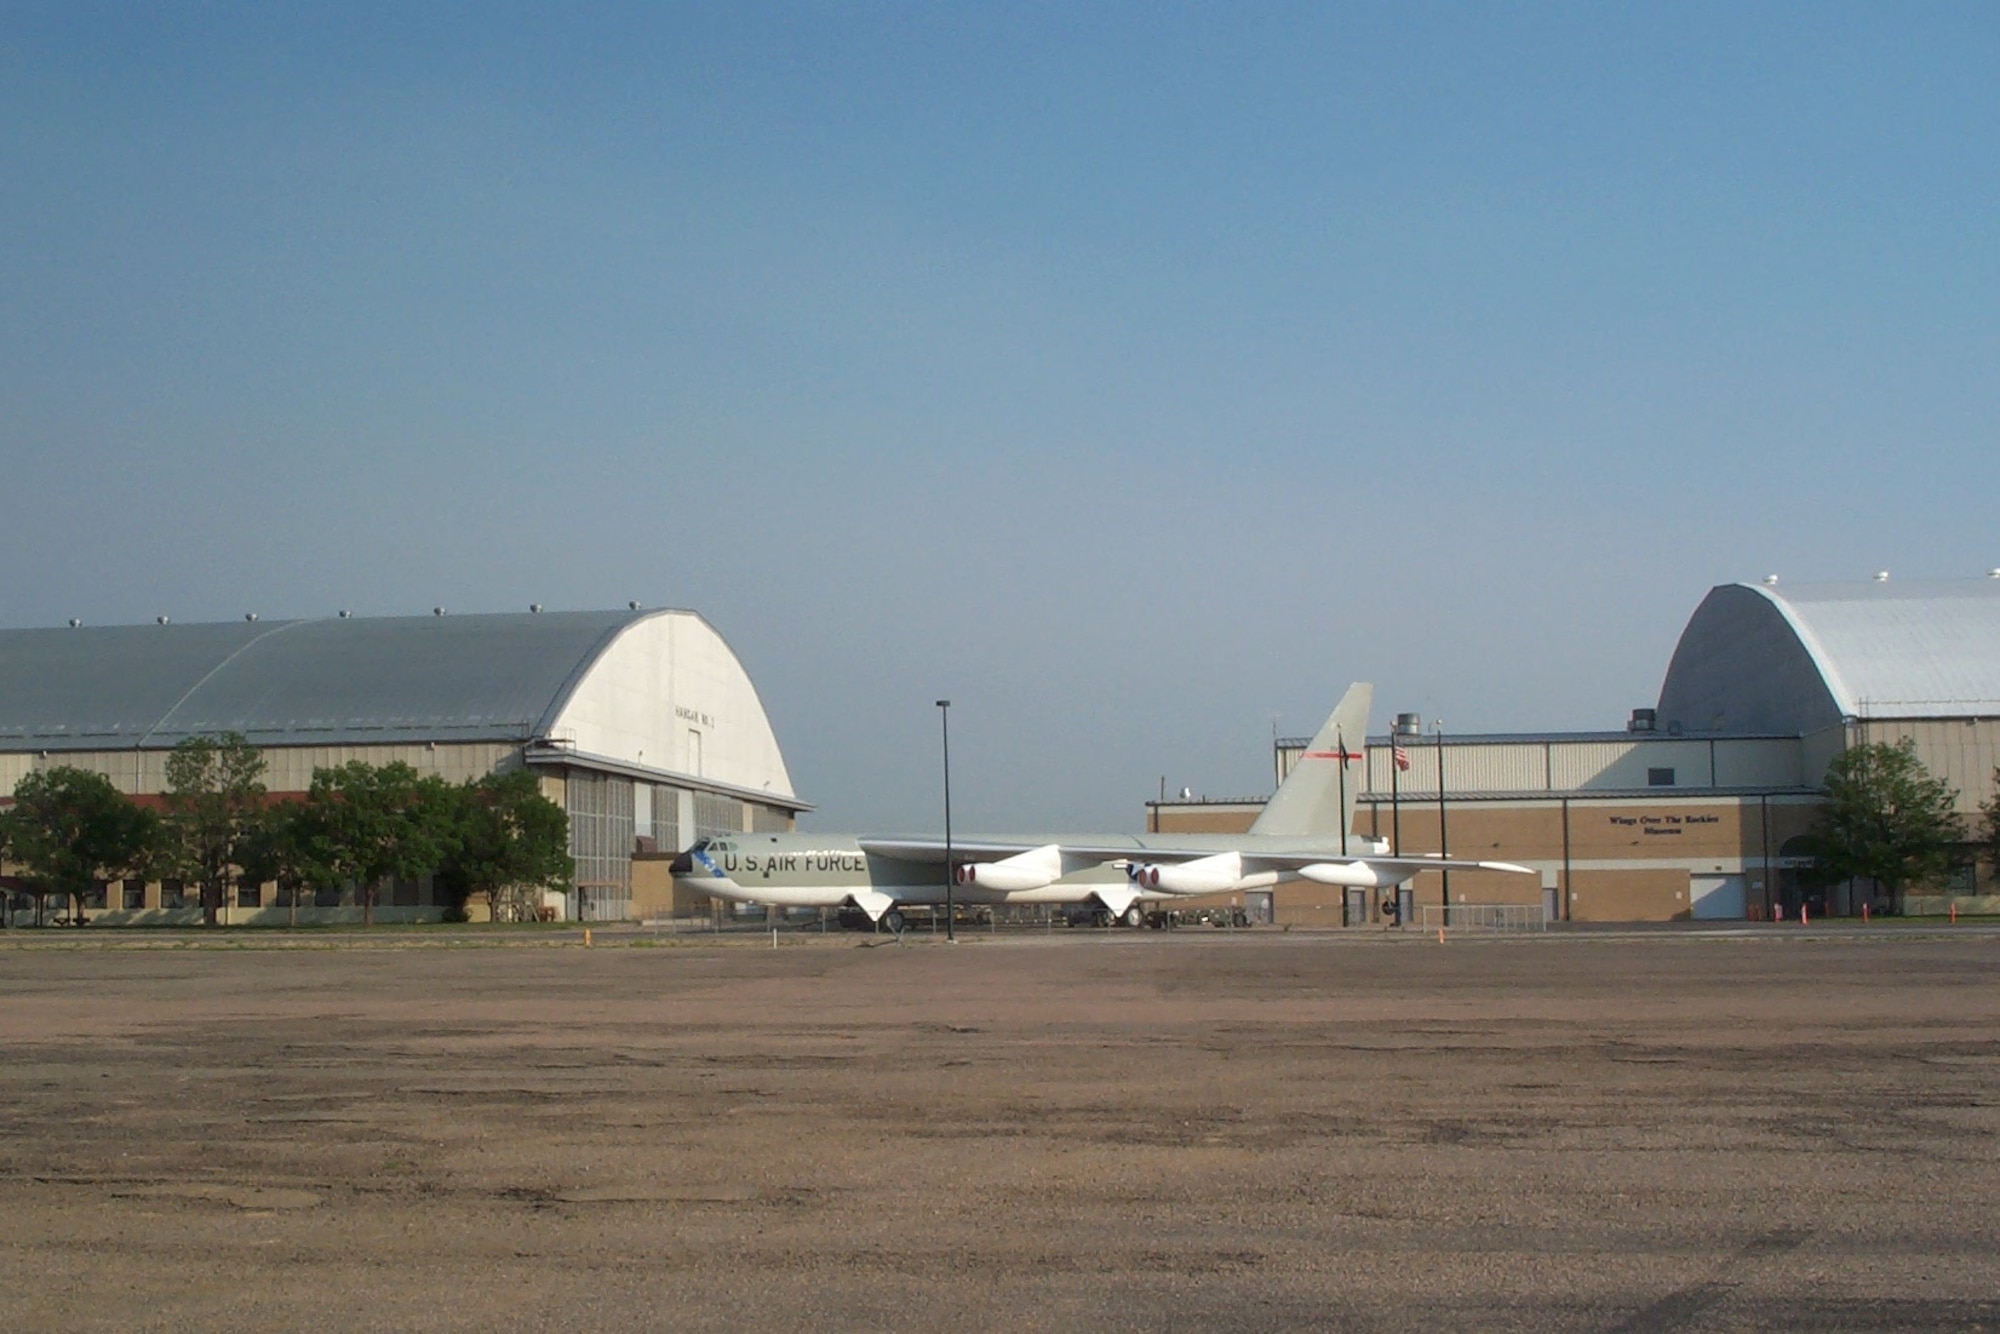 A B-52D bomber sits between Hangars 1 and 2 on the former Lowry AFB, Colo. While there are no longer runways adjacent to these buildings, the hangars are enjoying new life as an aviation museum.